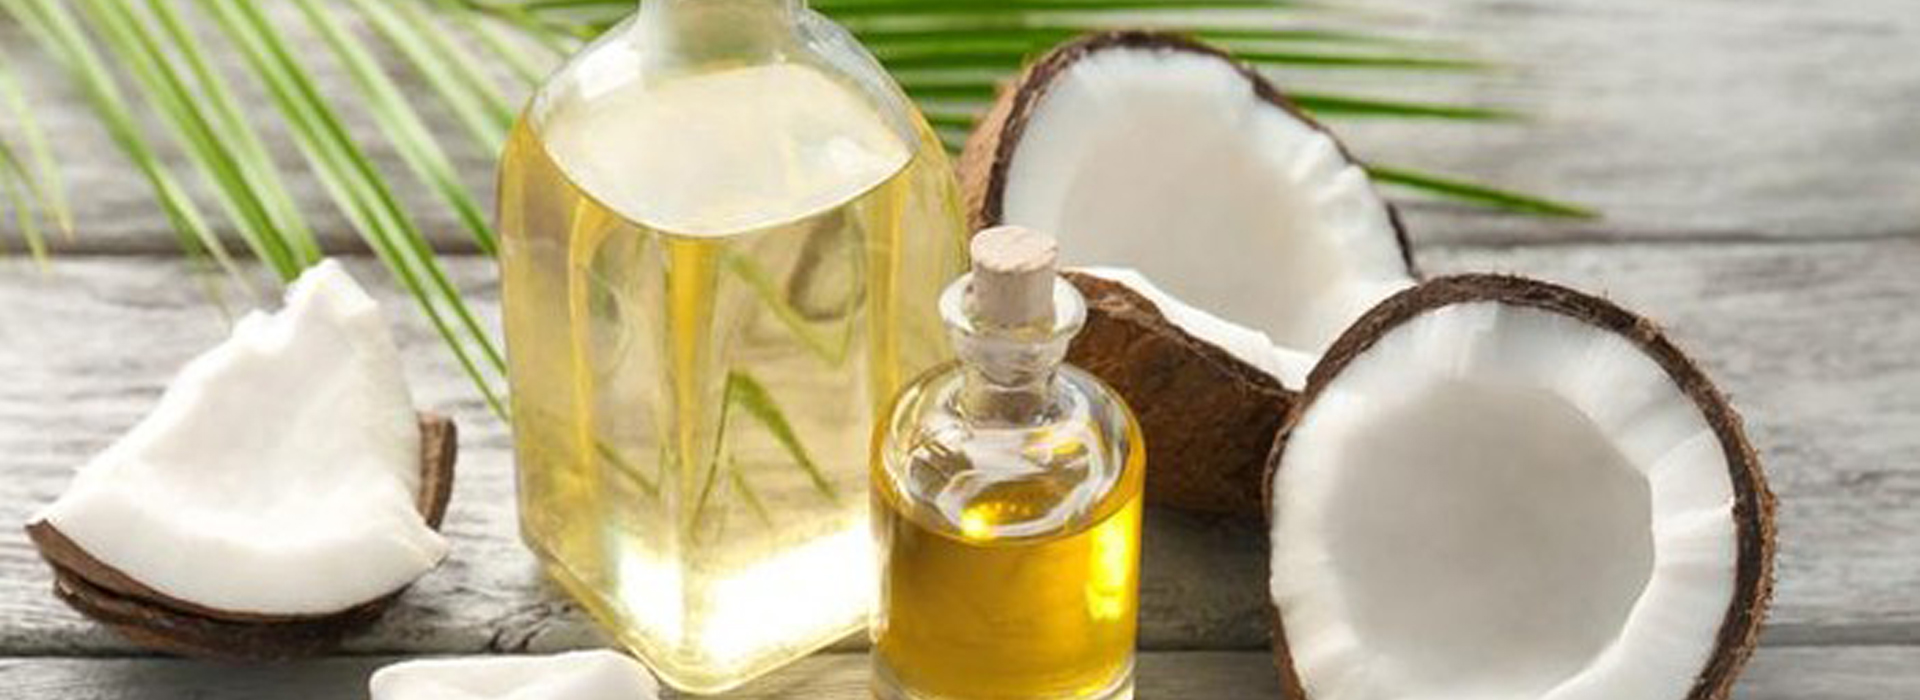 clinical-trial-by-gadjah-mada-university-virgin-coconut-oil-as-adjuvant-therapy-for-covid-19-patients20211103135555.jpg